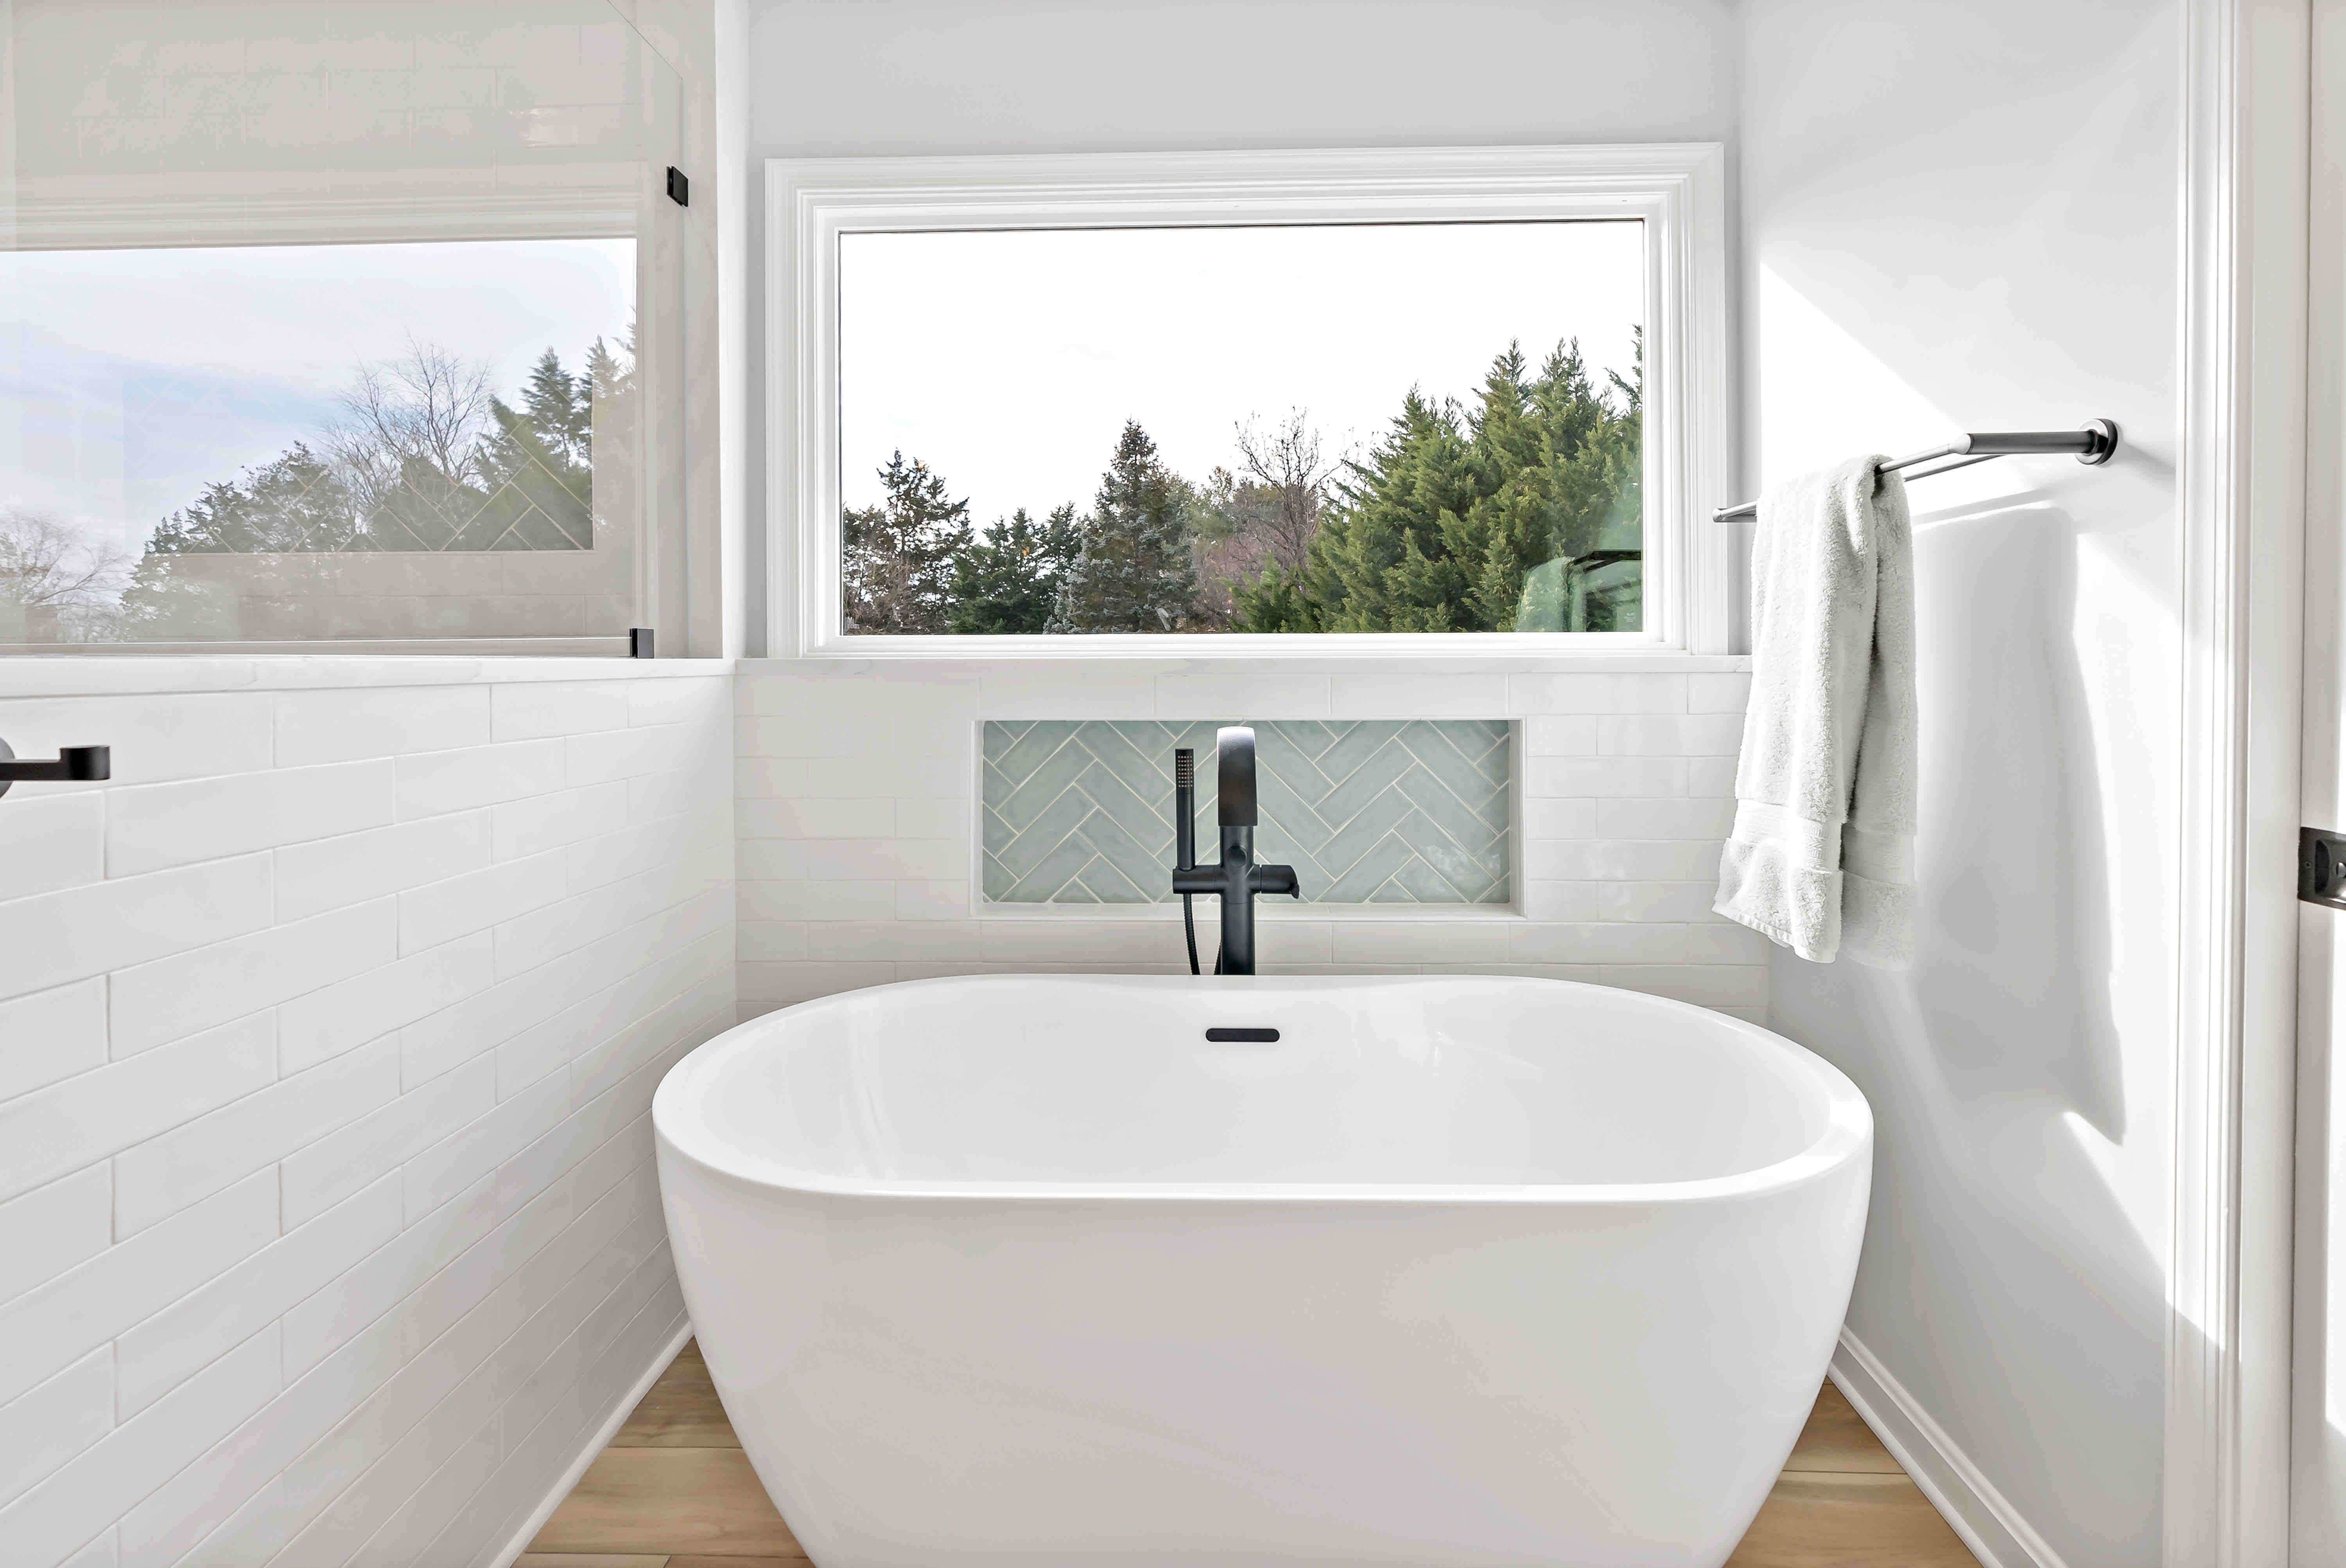 White stand-alone bathtub with black faucet